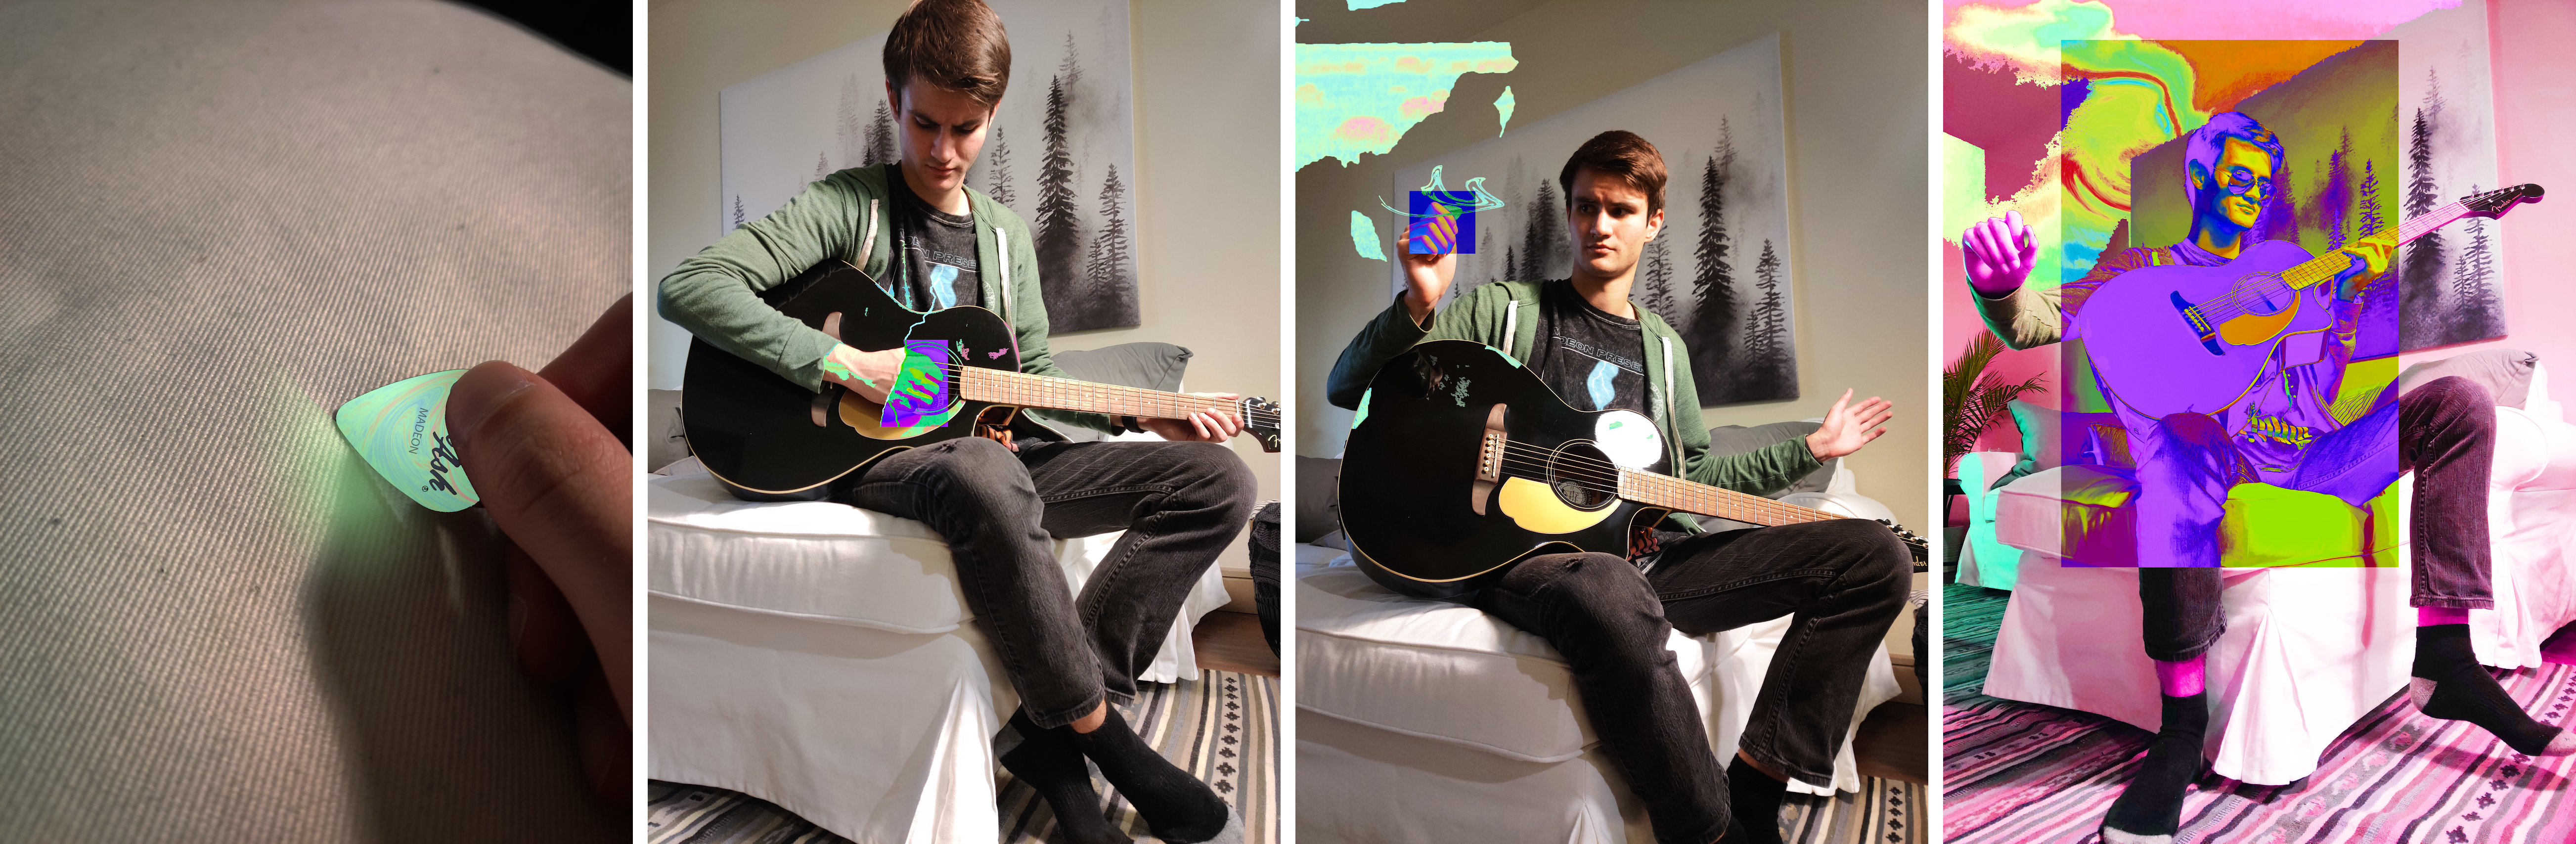 A photo broken up into four sections. The first section shows someone picking up a guitar pick with a green, orange, and blue swirl. It reads 'Madeon' in small text and emits a faint green glow. The second section shows a man wearing a green hoodie, a black t-shirt reading 'Madeon Presents', and black jeans sitting on a white couch with an acoustic guitar. As he strums the guitar, a lightning bolt from the shirt strikes the guitar pick and emits a violet cube that distorts the color inside of it. The third section shows the man curiously looking at the guitar pick, which is now emitting a purple and green light. The space around the pick is also distorted in color. The final section shows the man strumming the guitar with more confidence. He has adorned sunglasses and the entire photo has changed to a pink and green vaporwave color. Within the section sits another box around the base of the guitar and the man, which has transformed the colors within to a heavily saturated, rainbow palette. He is smiling.